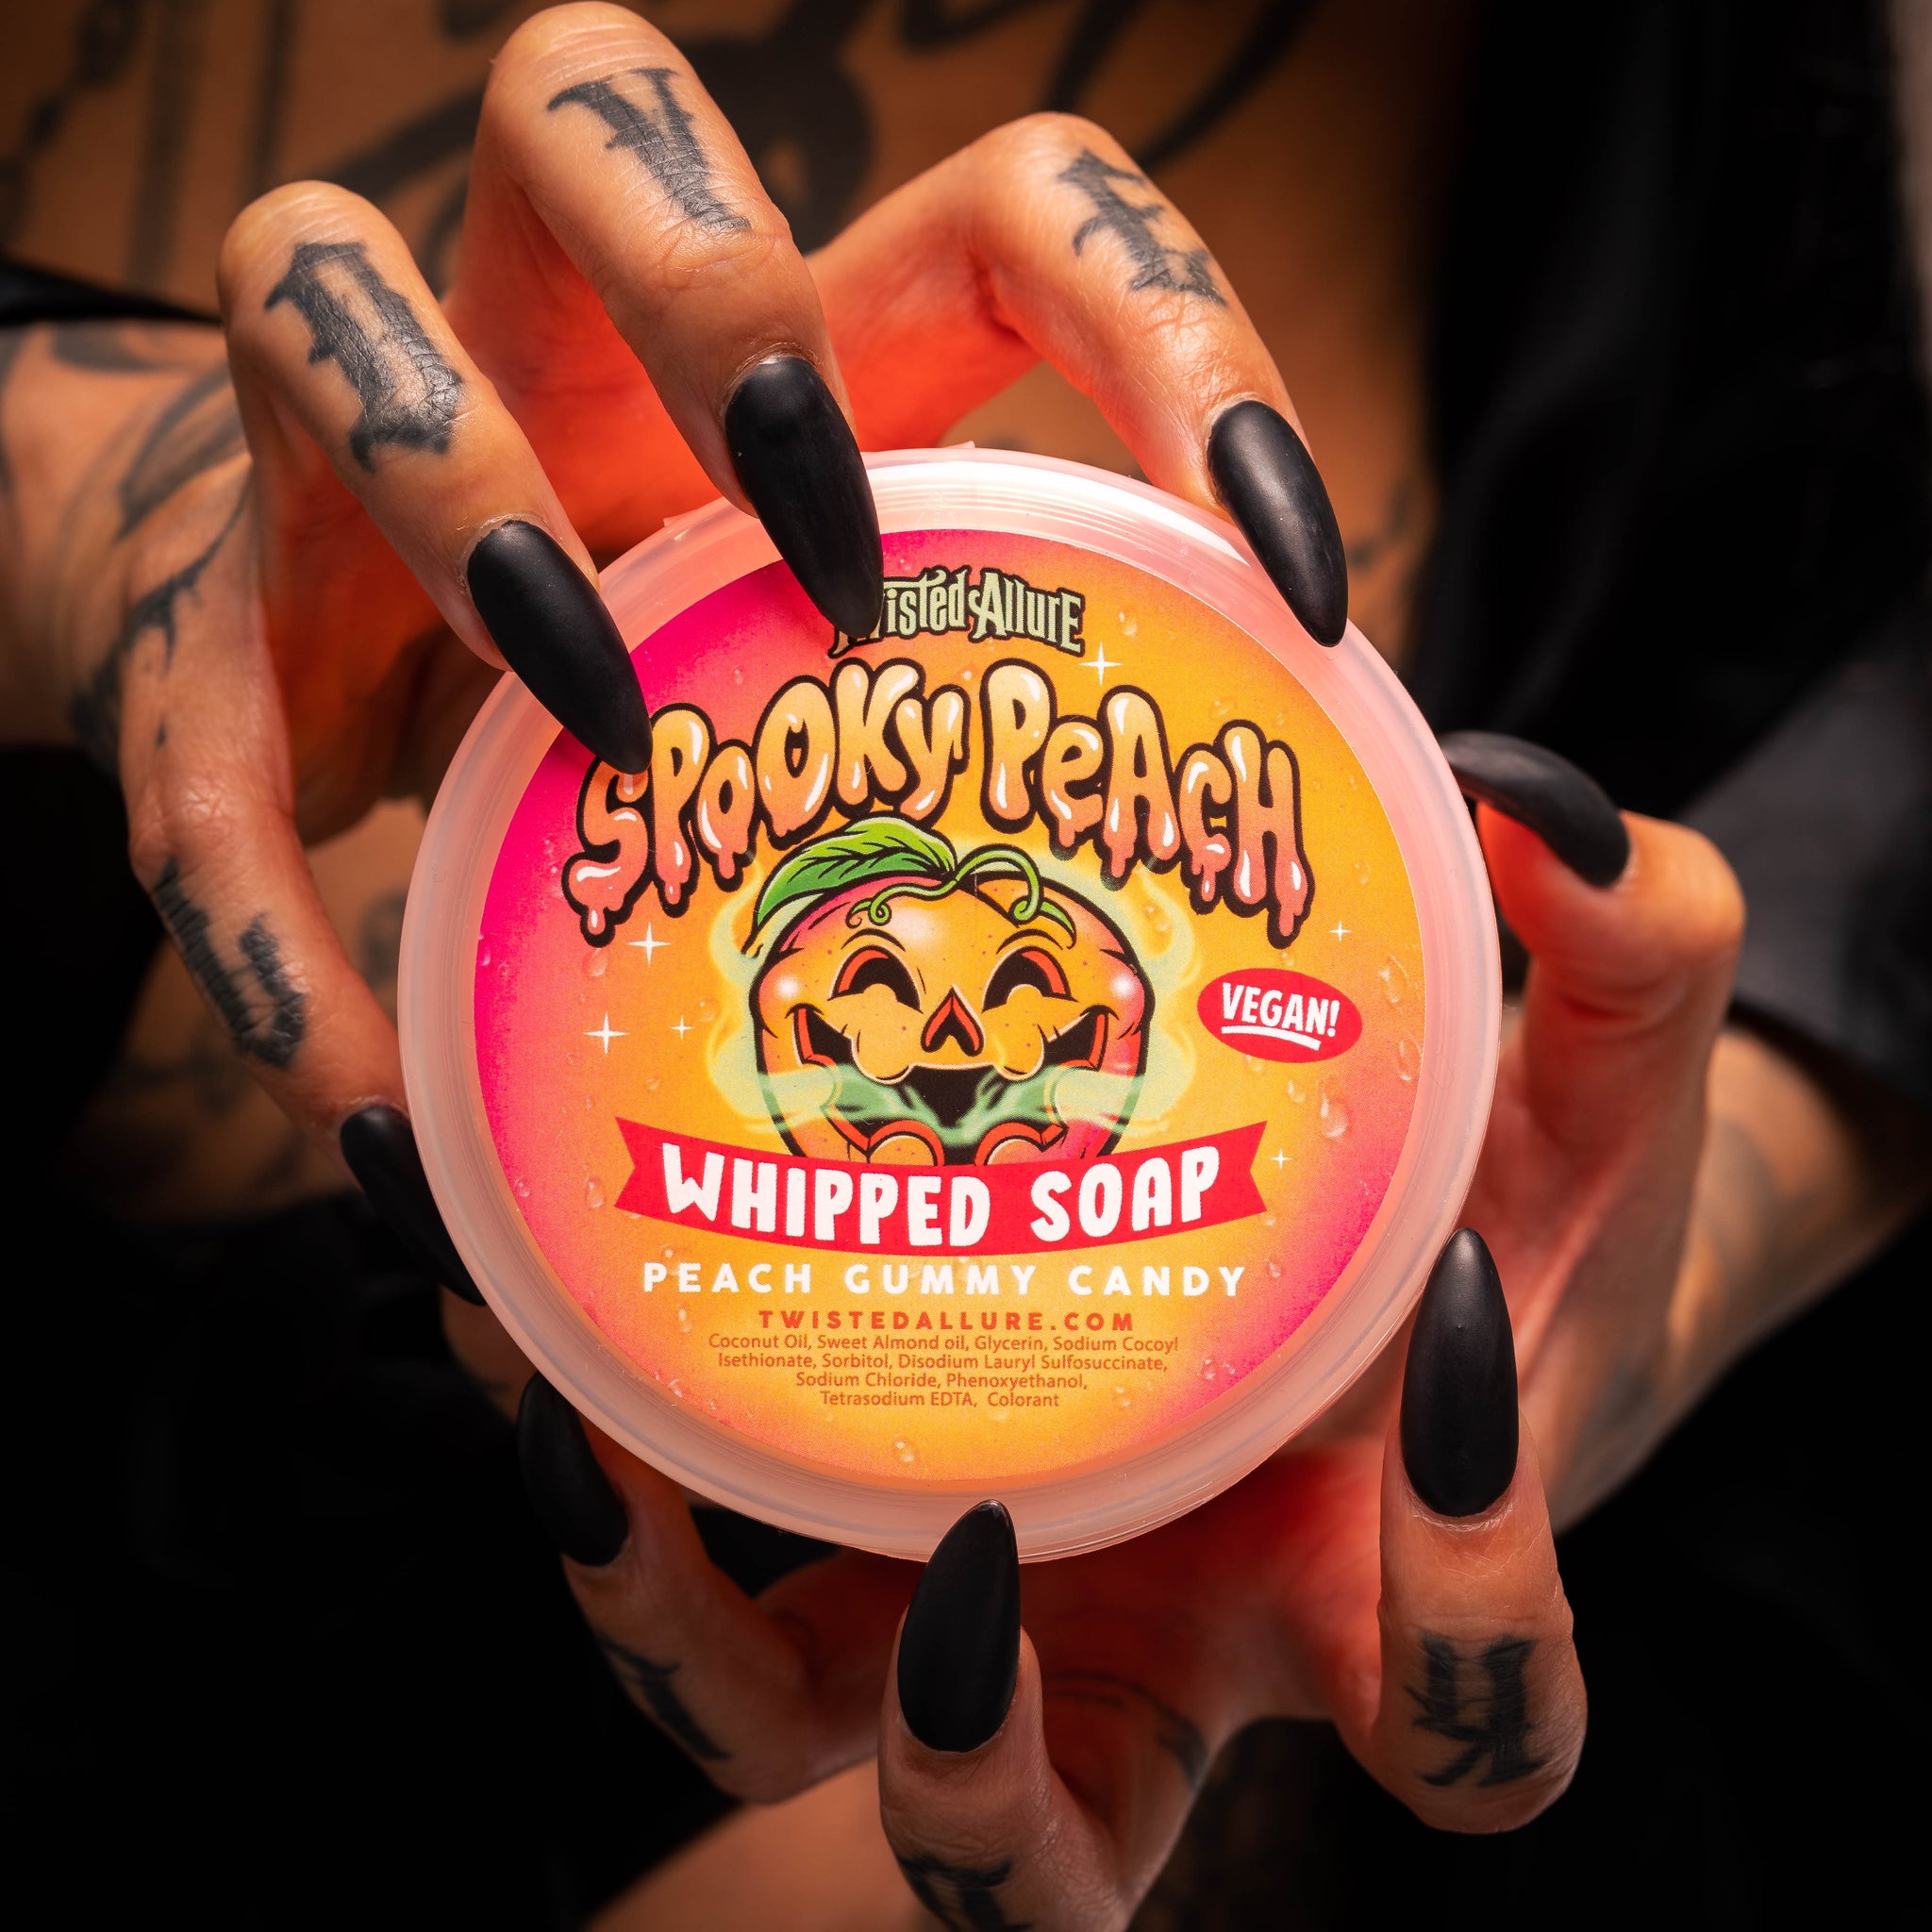 Spooky Peach Whipped Soap